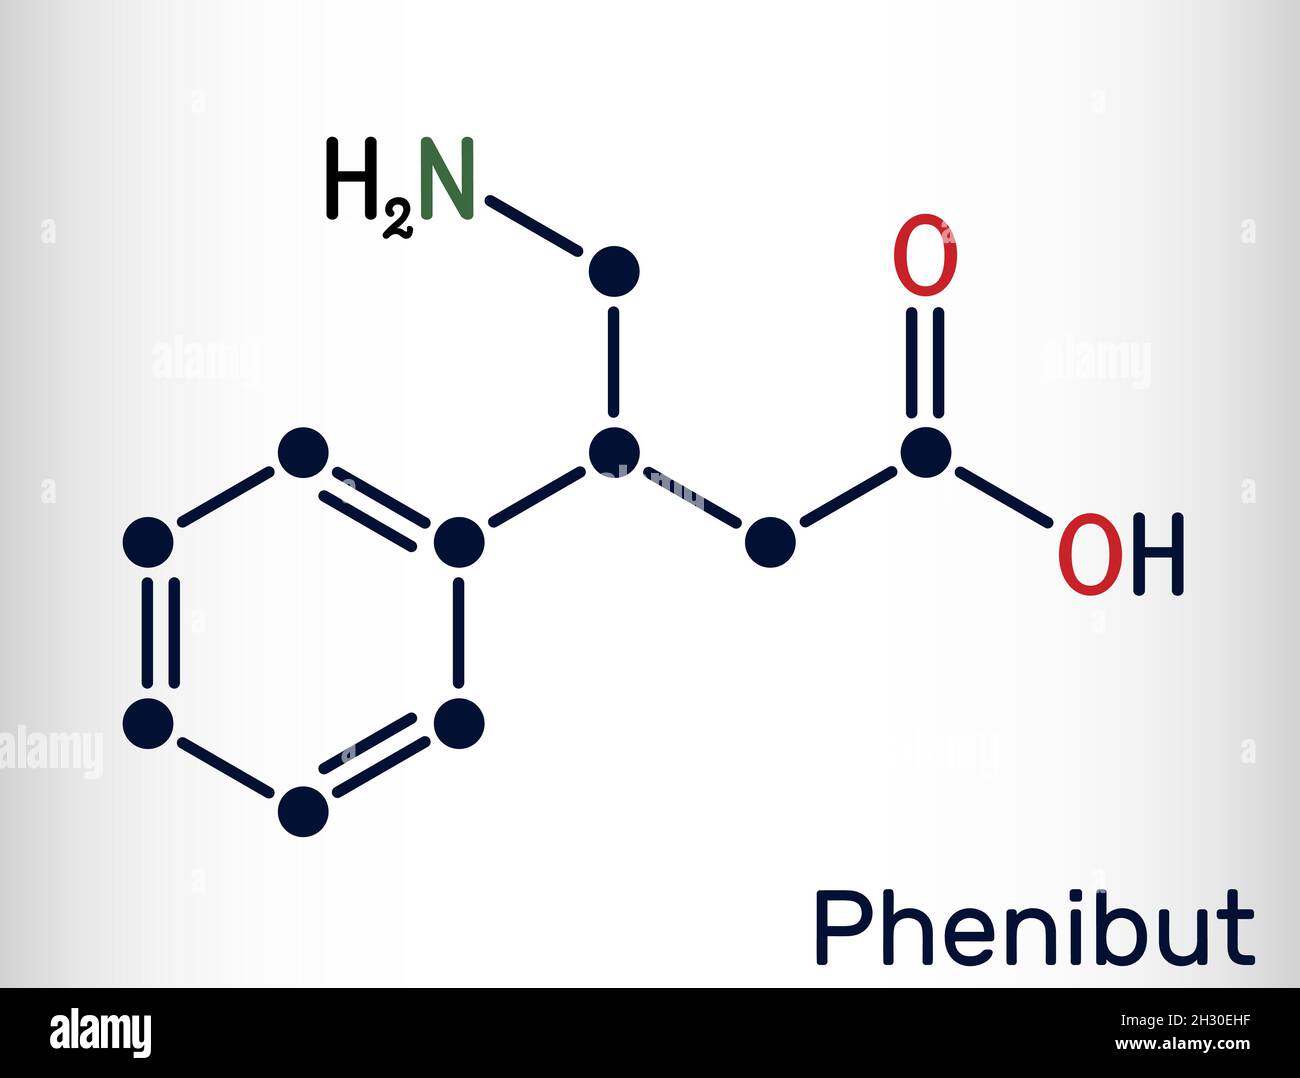 Phenibut molecule. It is central nervous system depressant with anxiolytic and sedative effects. Skeletal chemical formula. Vector illustration Stock Vector